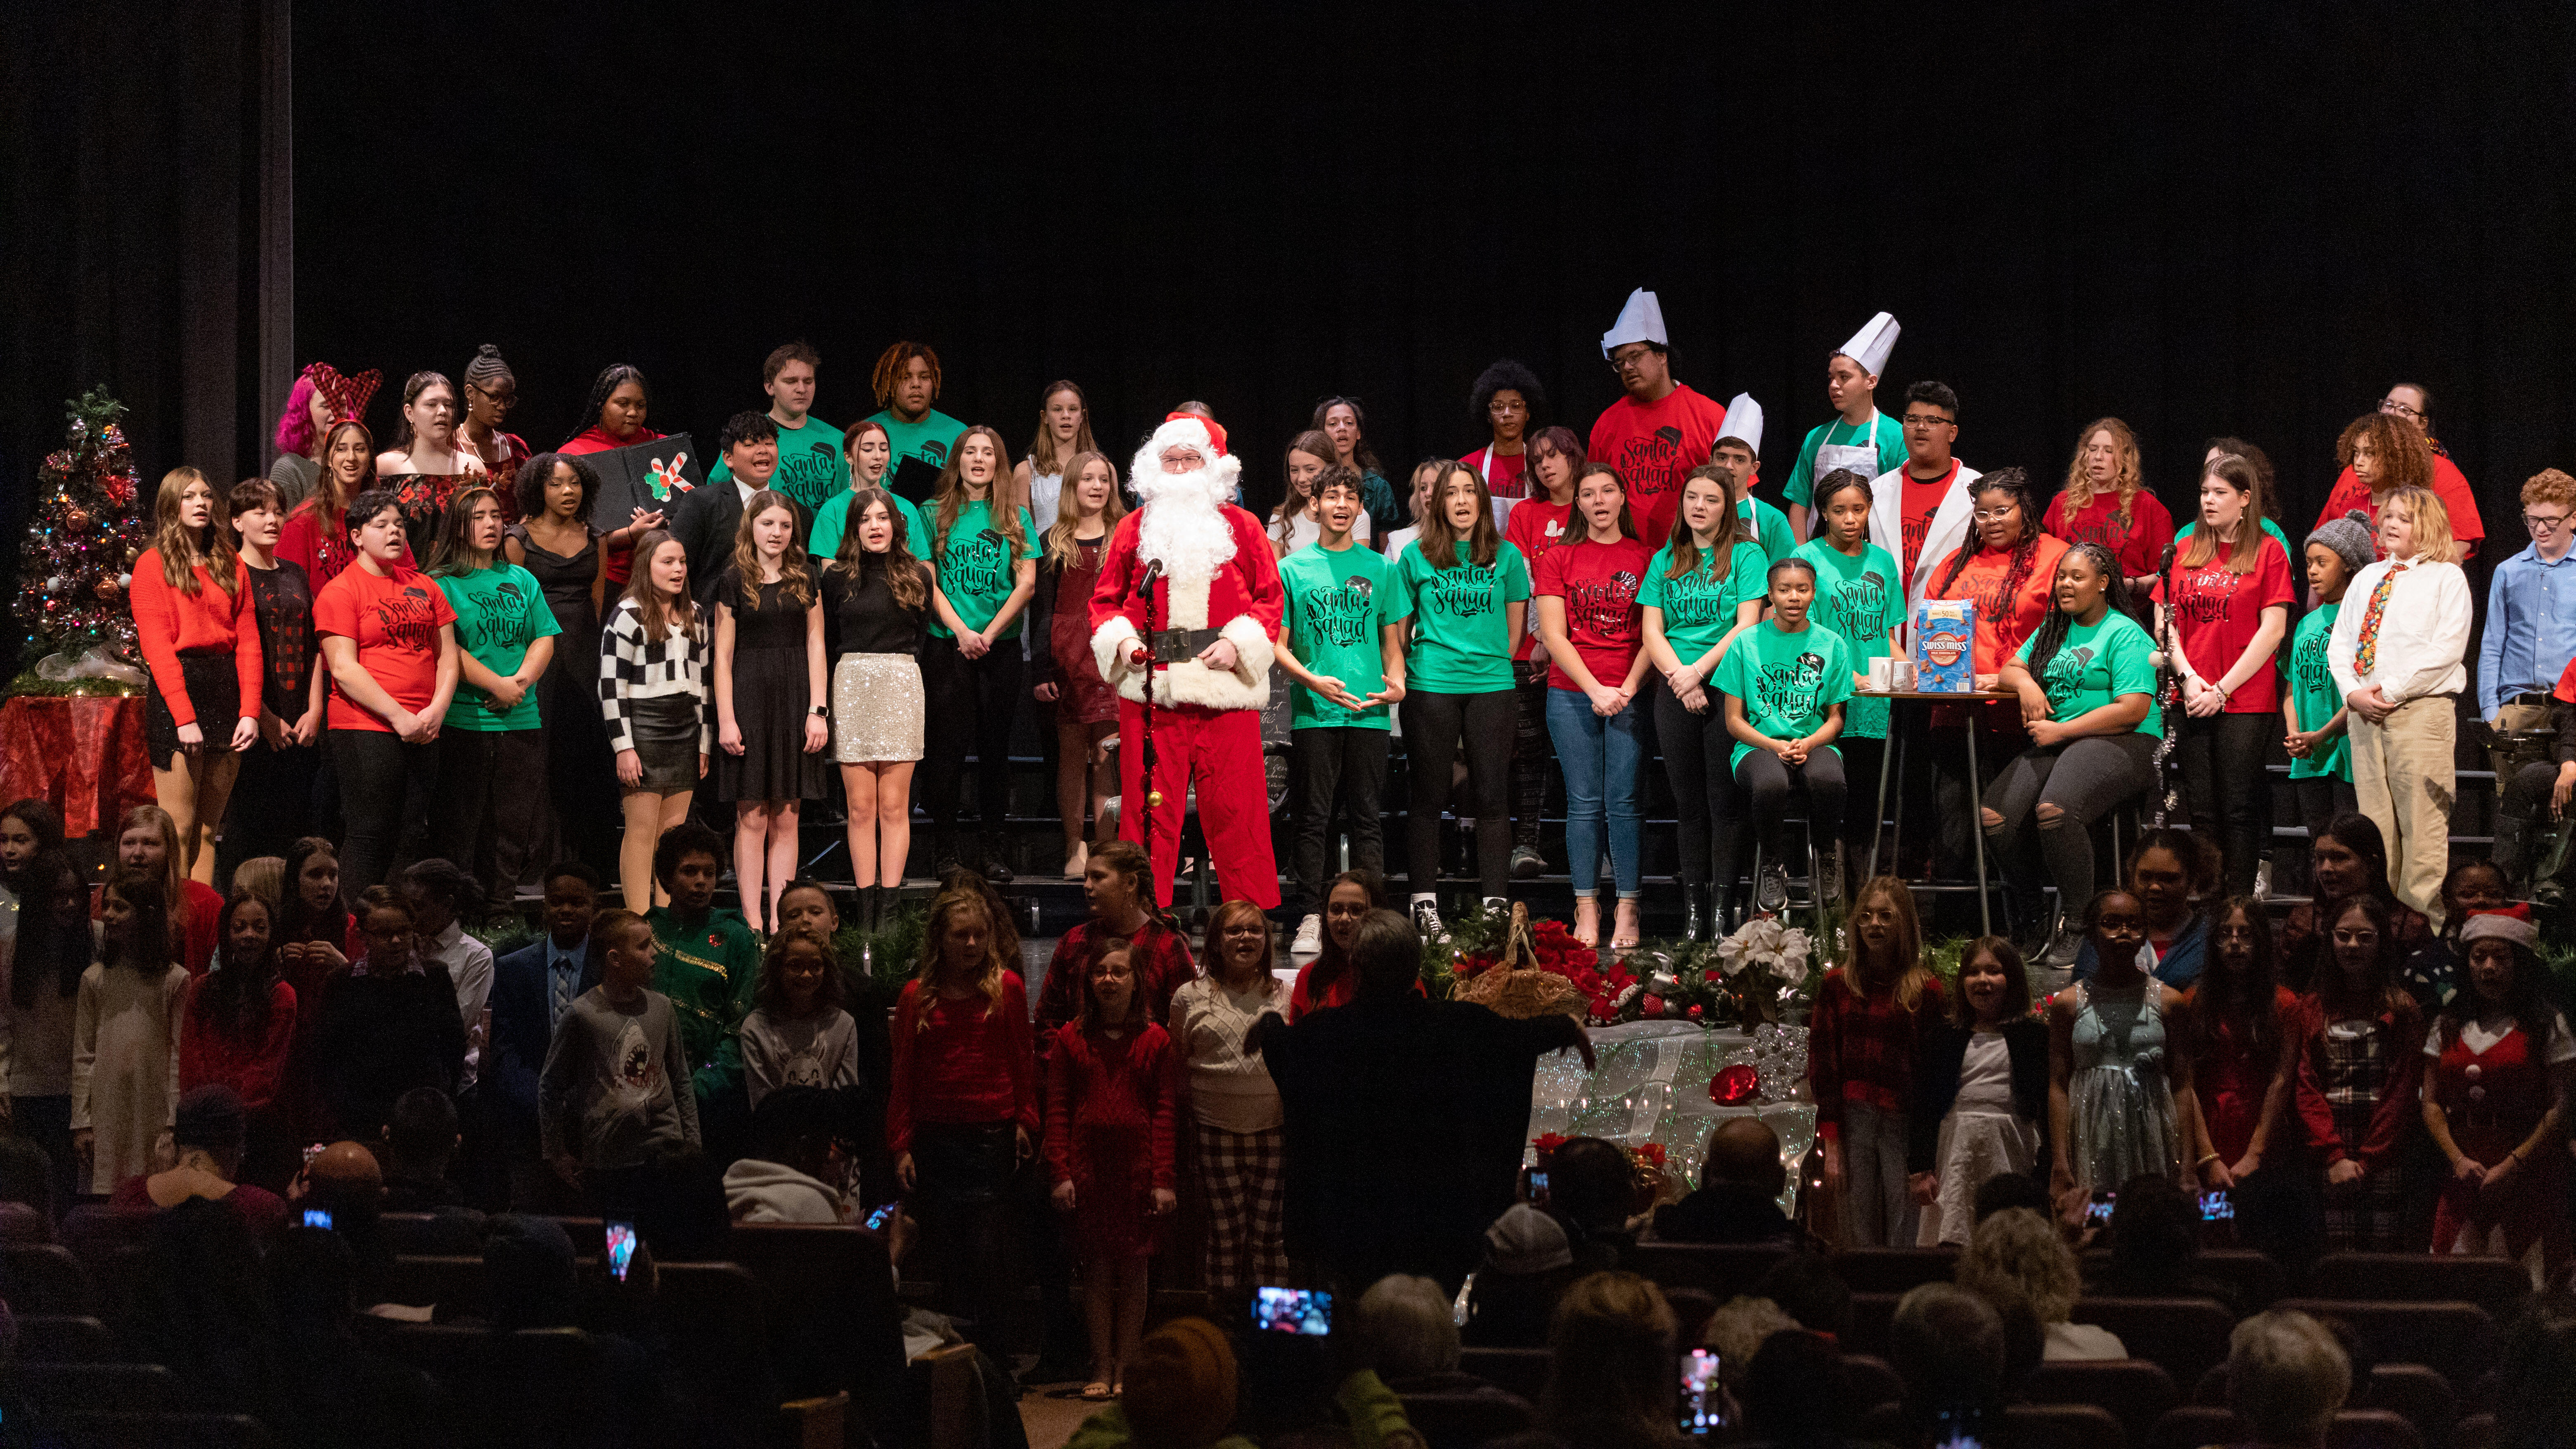  Student voices shine during annual holiday show